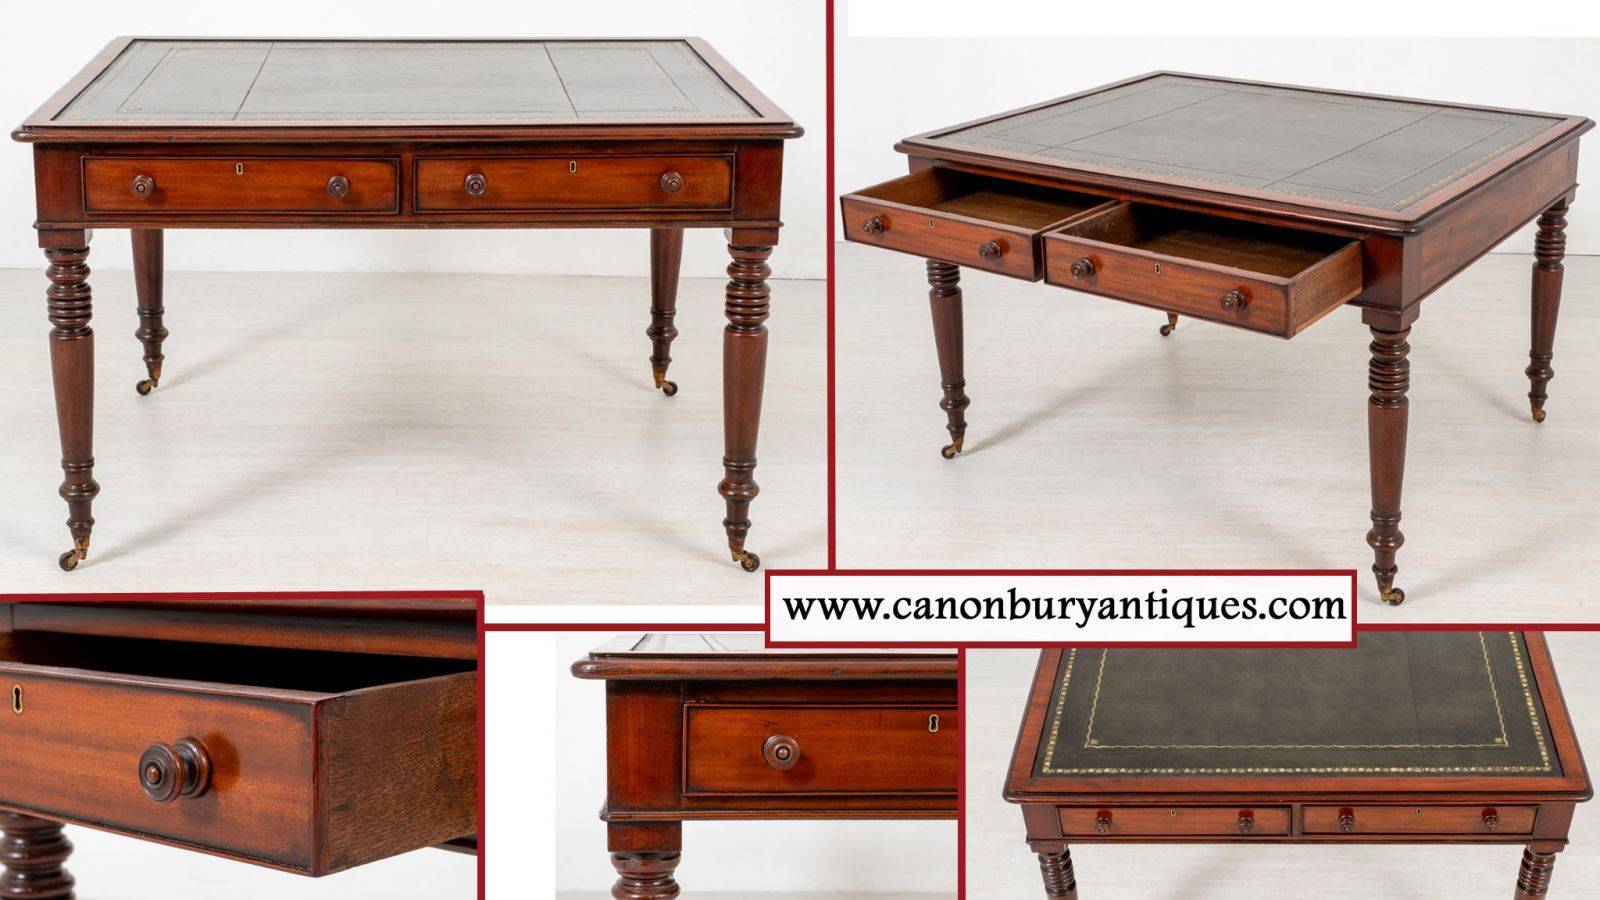 William IV Period Desk or Writing Table